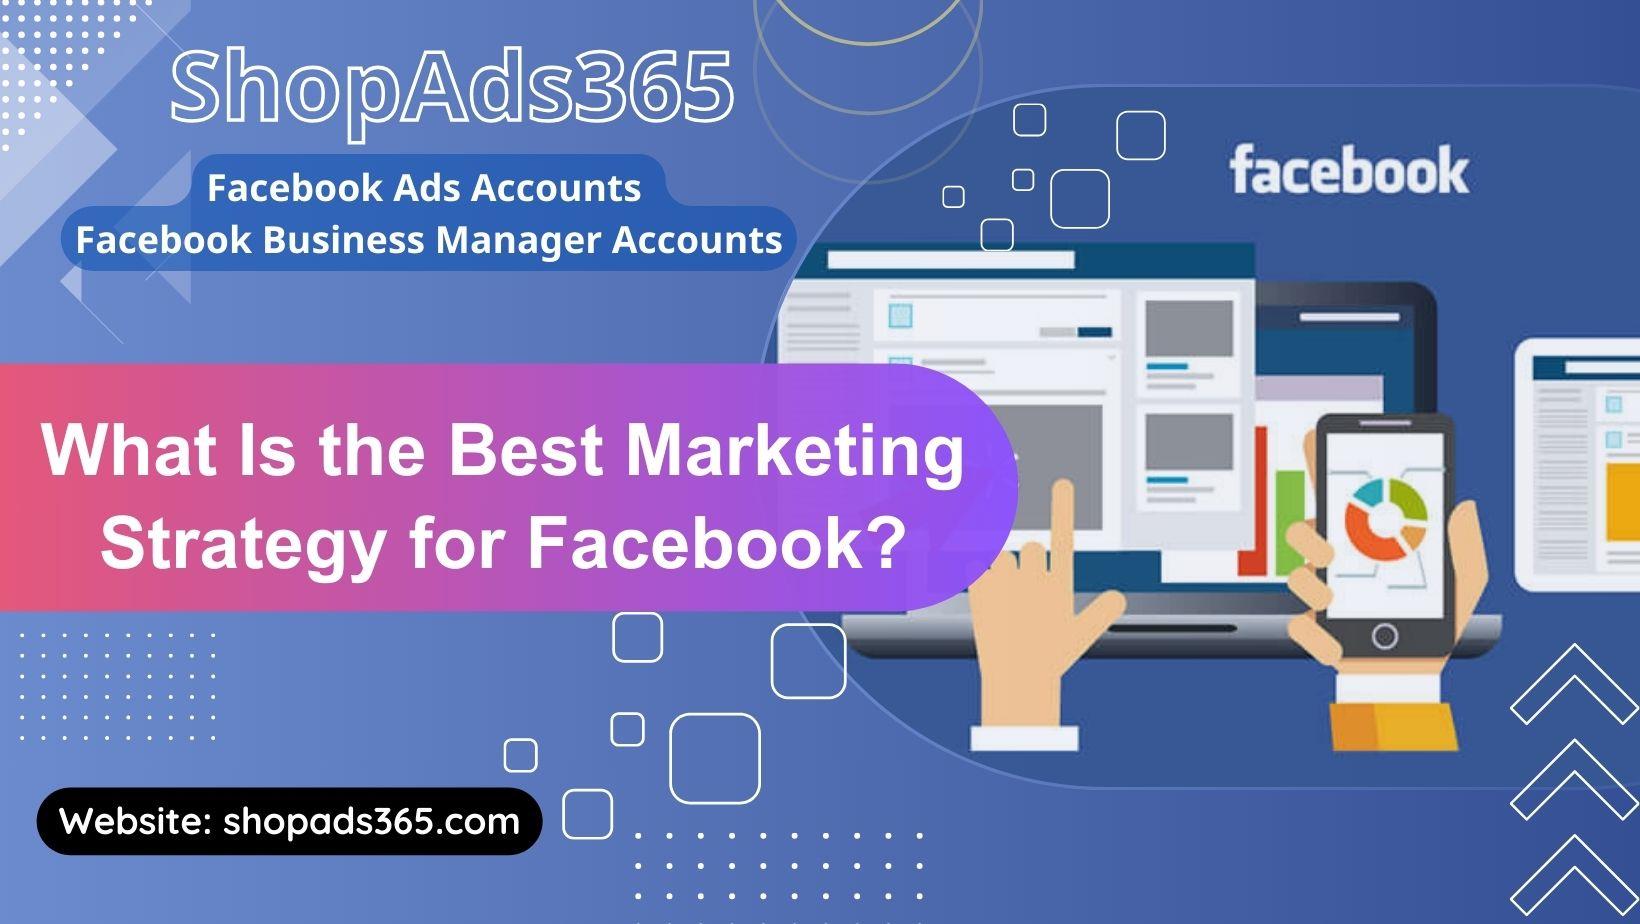 What Is the Best Marketing Strategy for Facebook?